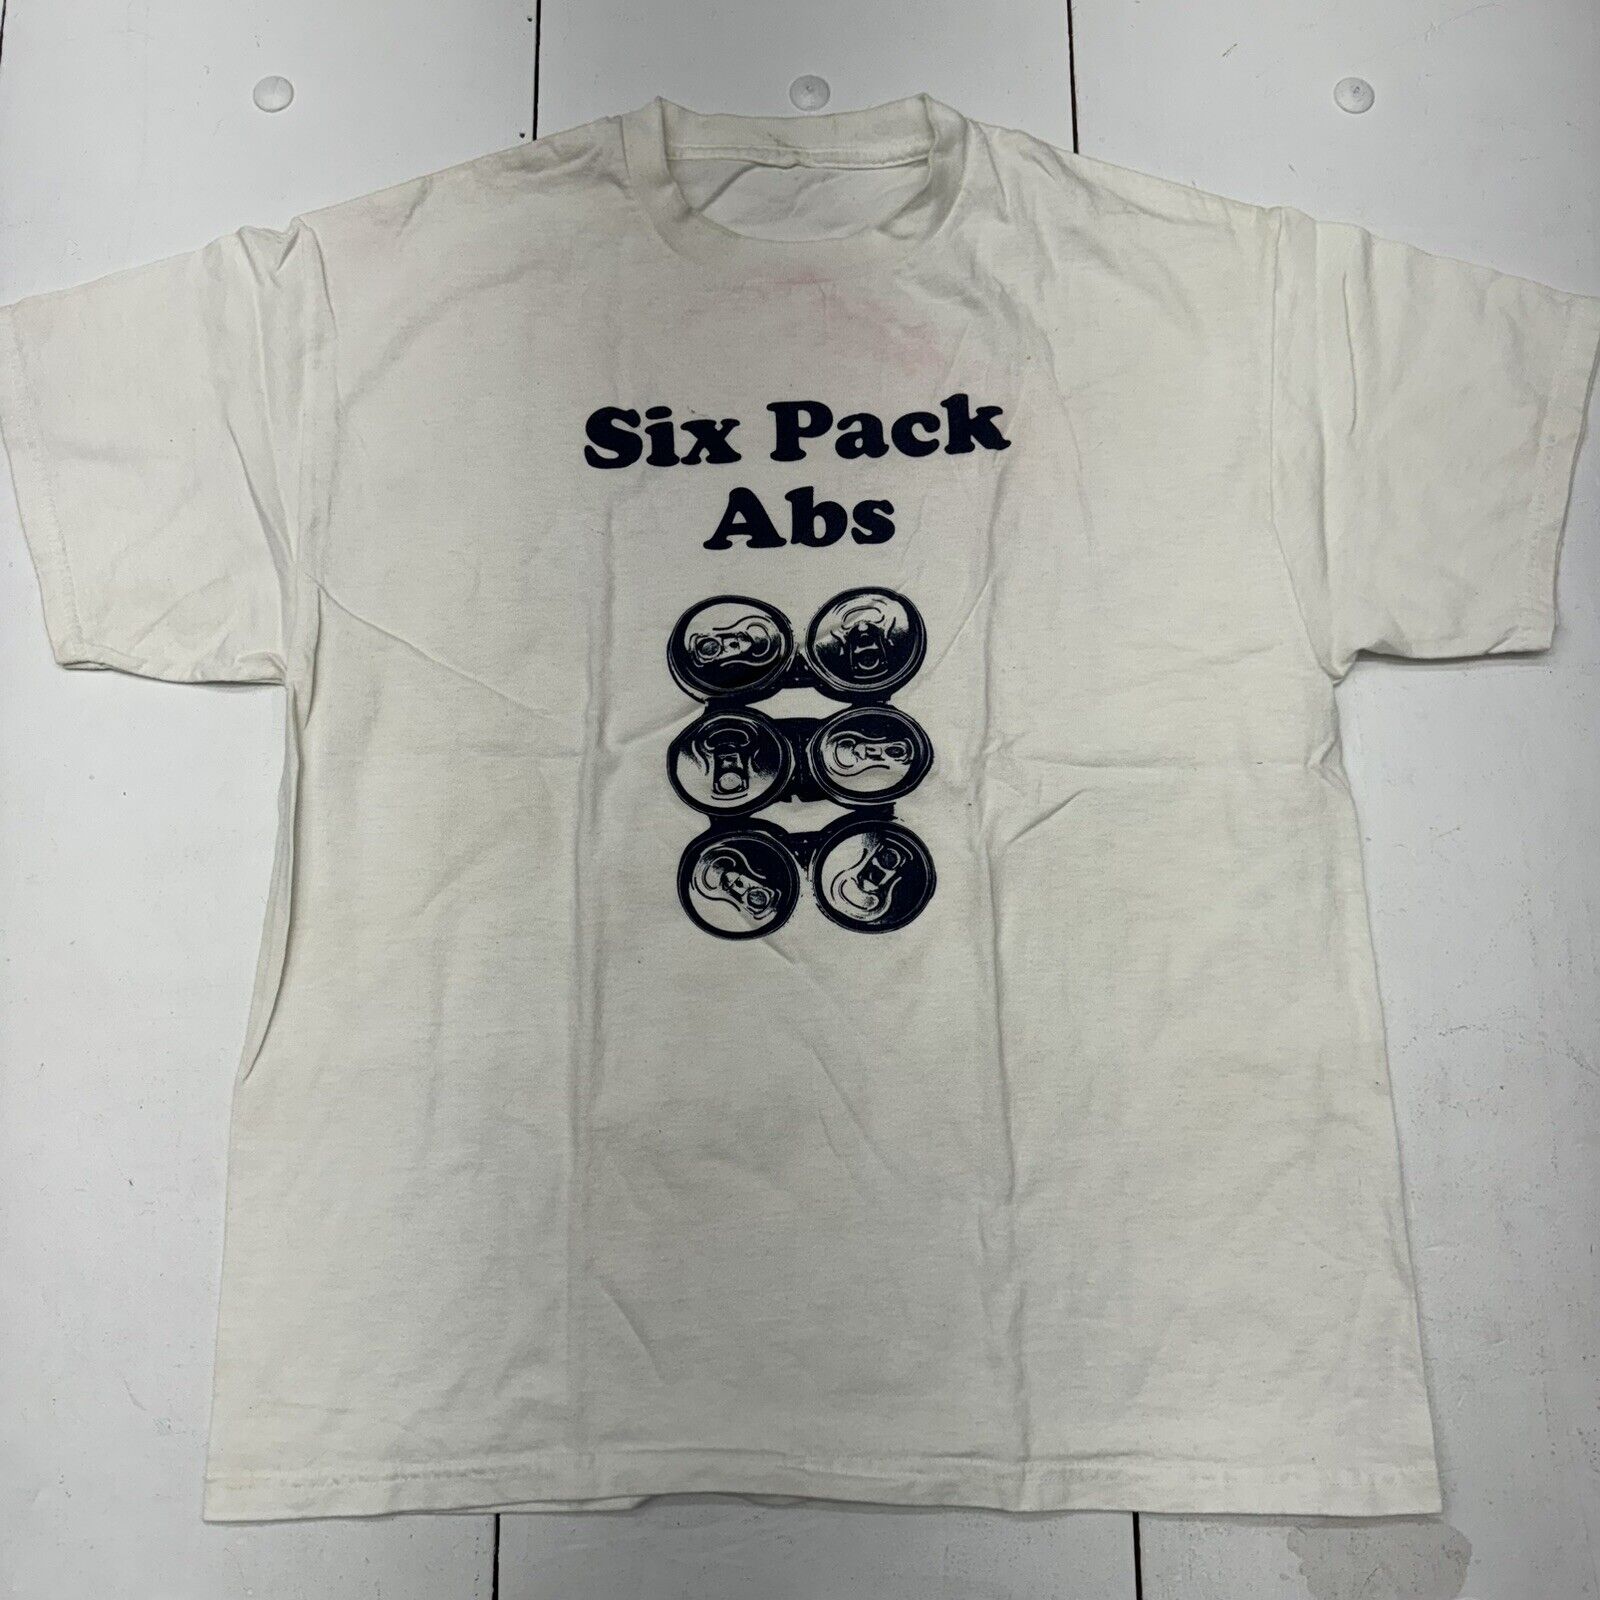 Novelty White Short Sleeve T-Shirt ‘Six Pack Abs’ Graphic Adult Size XL